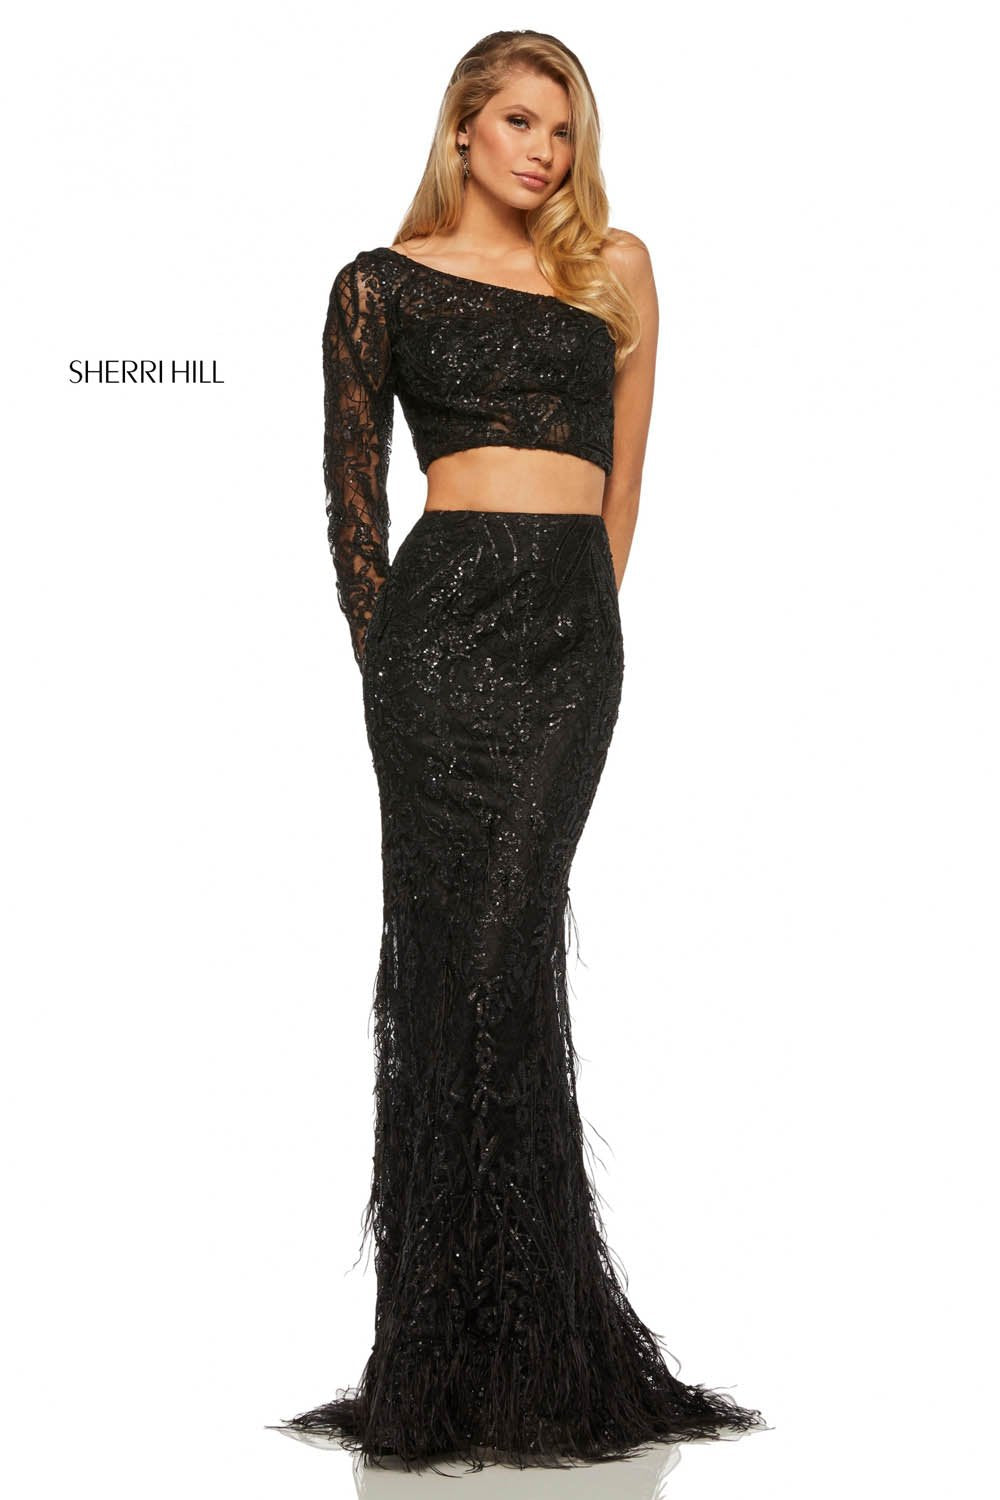 Sherri Hill 52555 dress images in these colors: Rose Gold, Black, Wine, Navy, Silver.